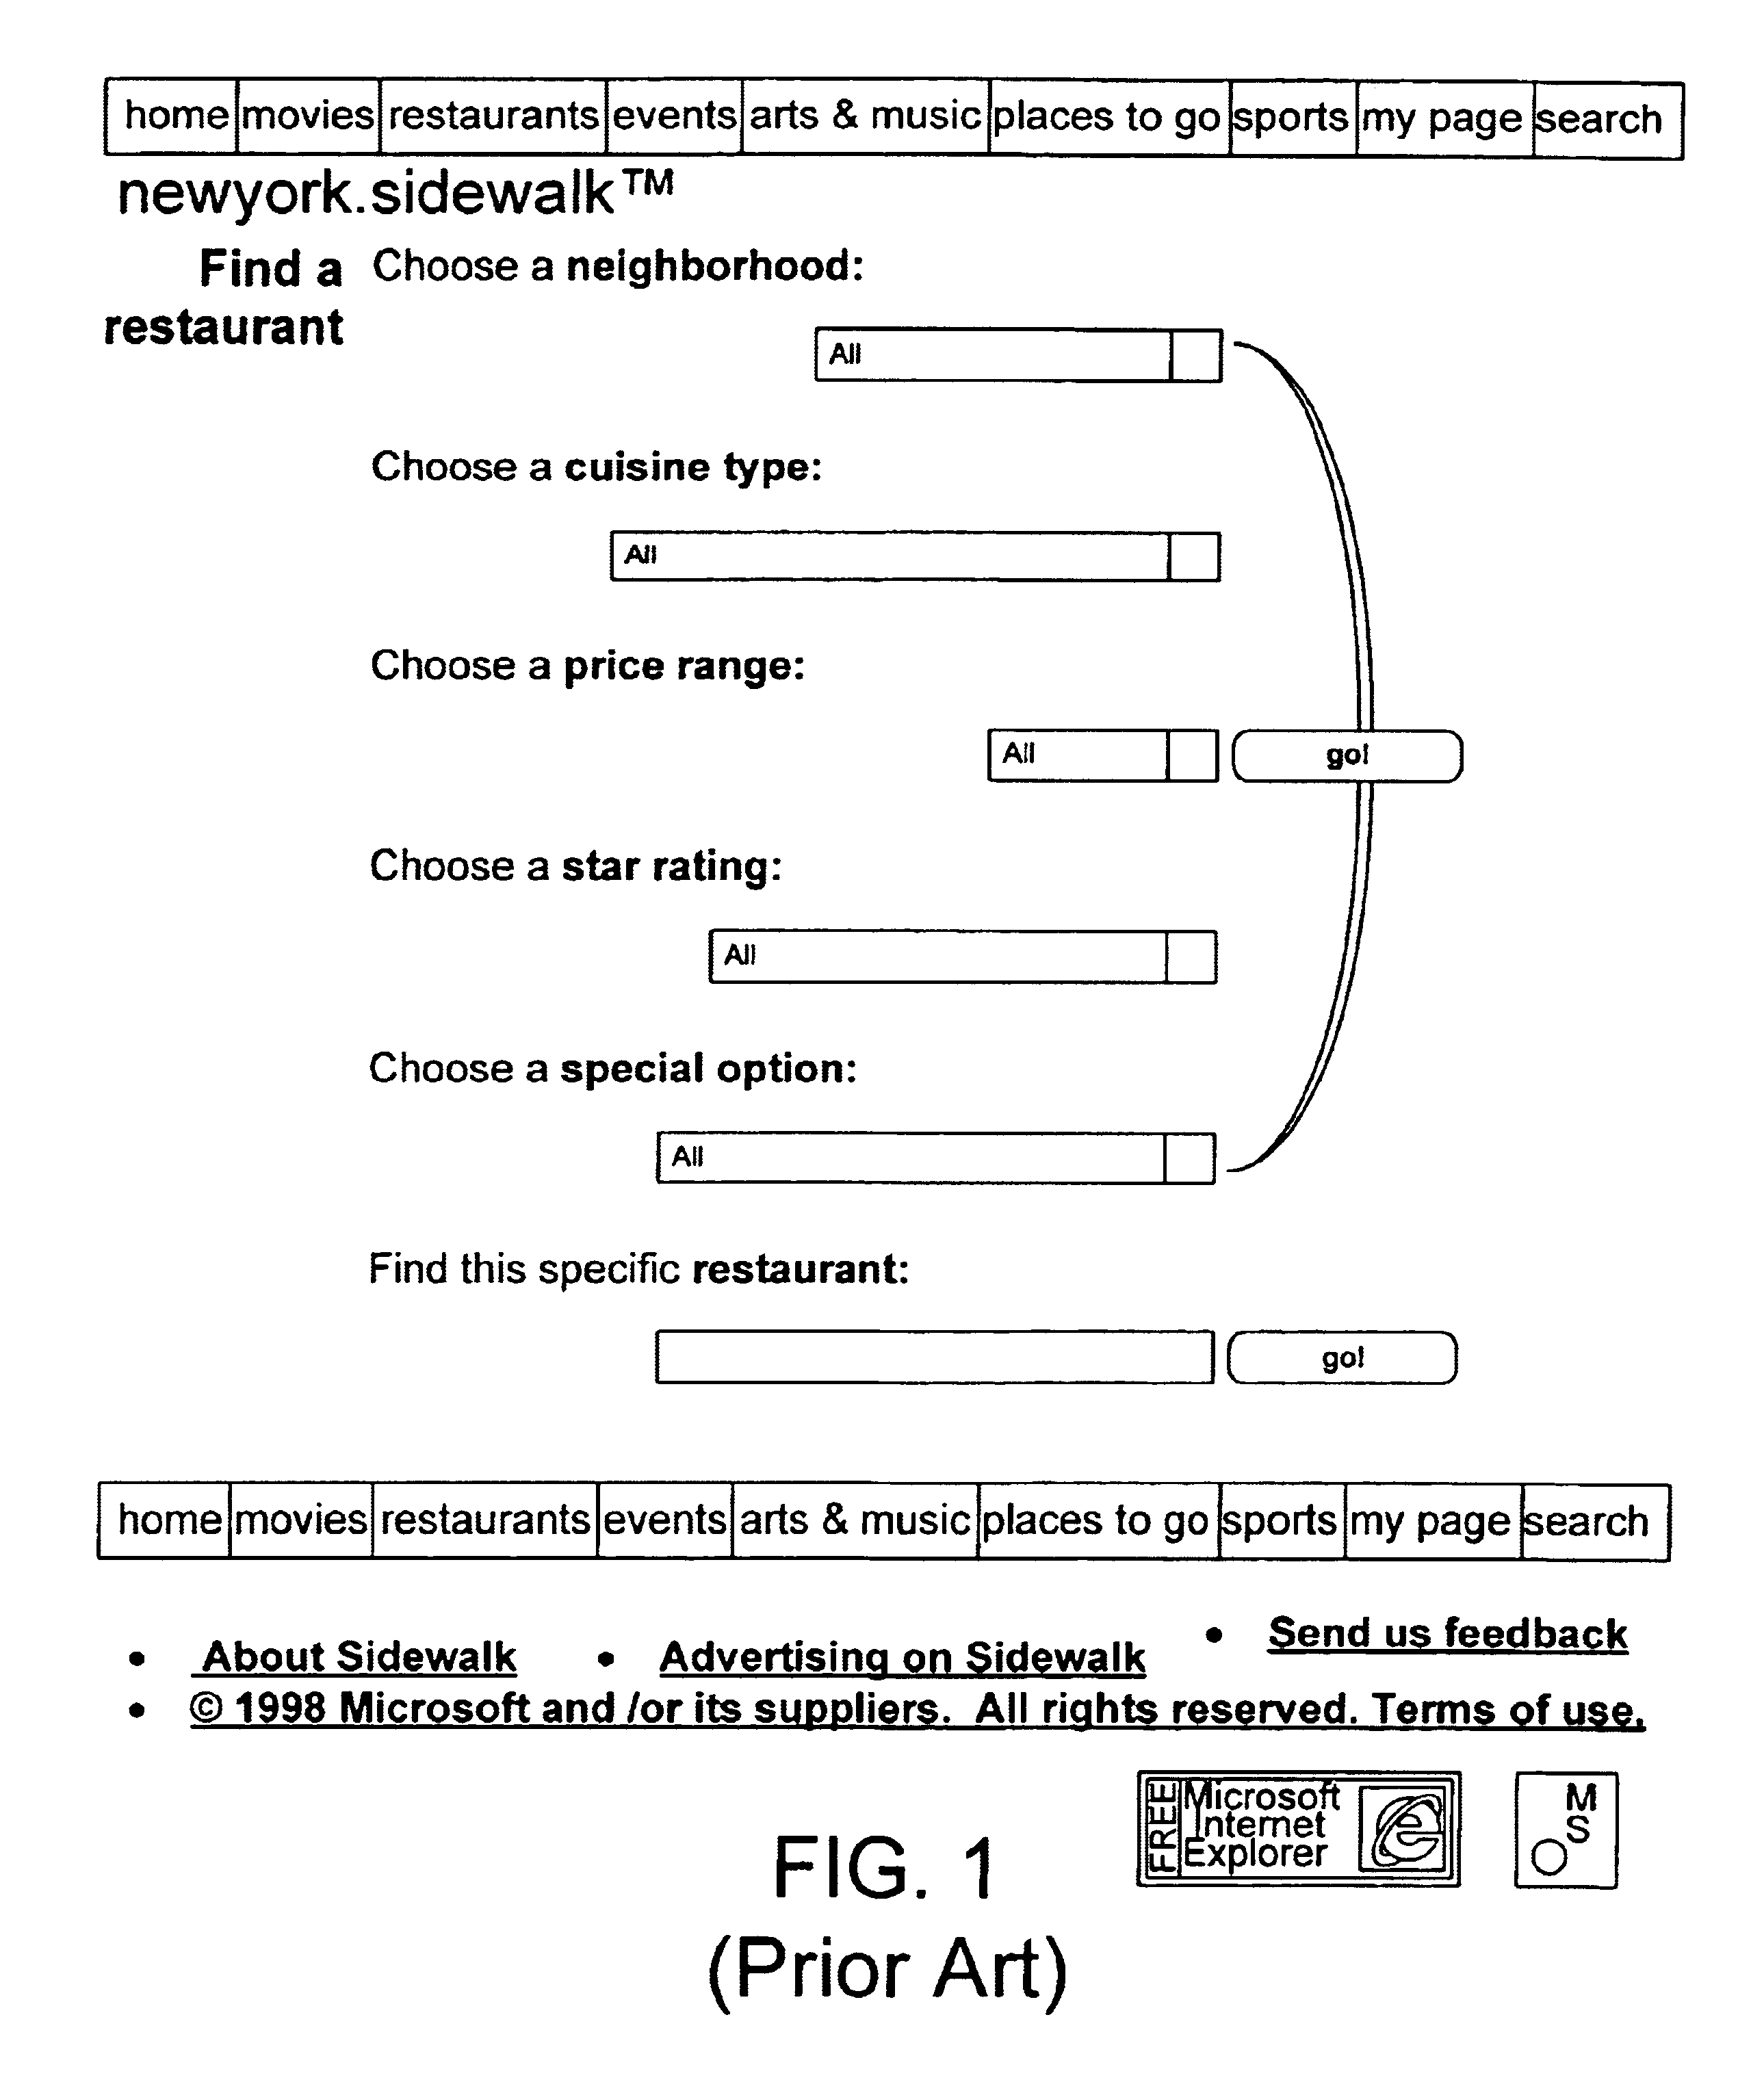 Methods, apparatus, and data structures for facilitating a natural language interface to stored information